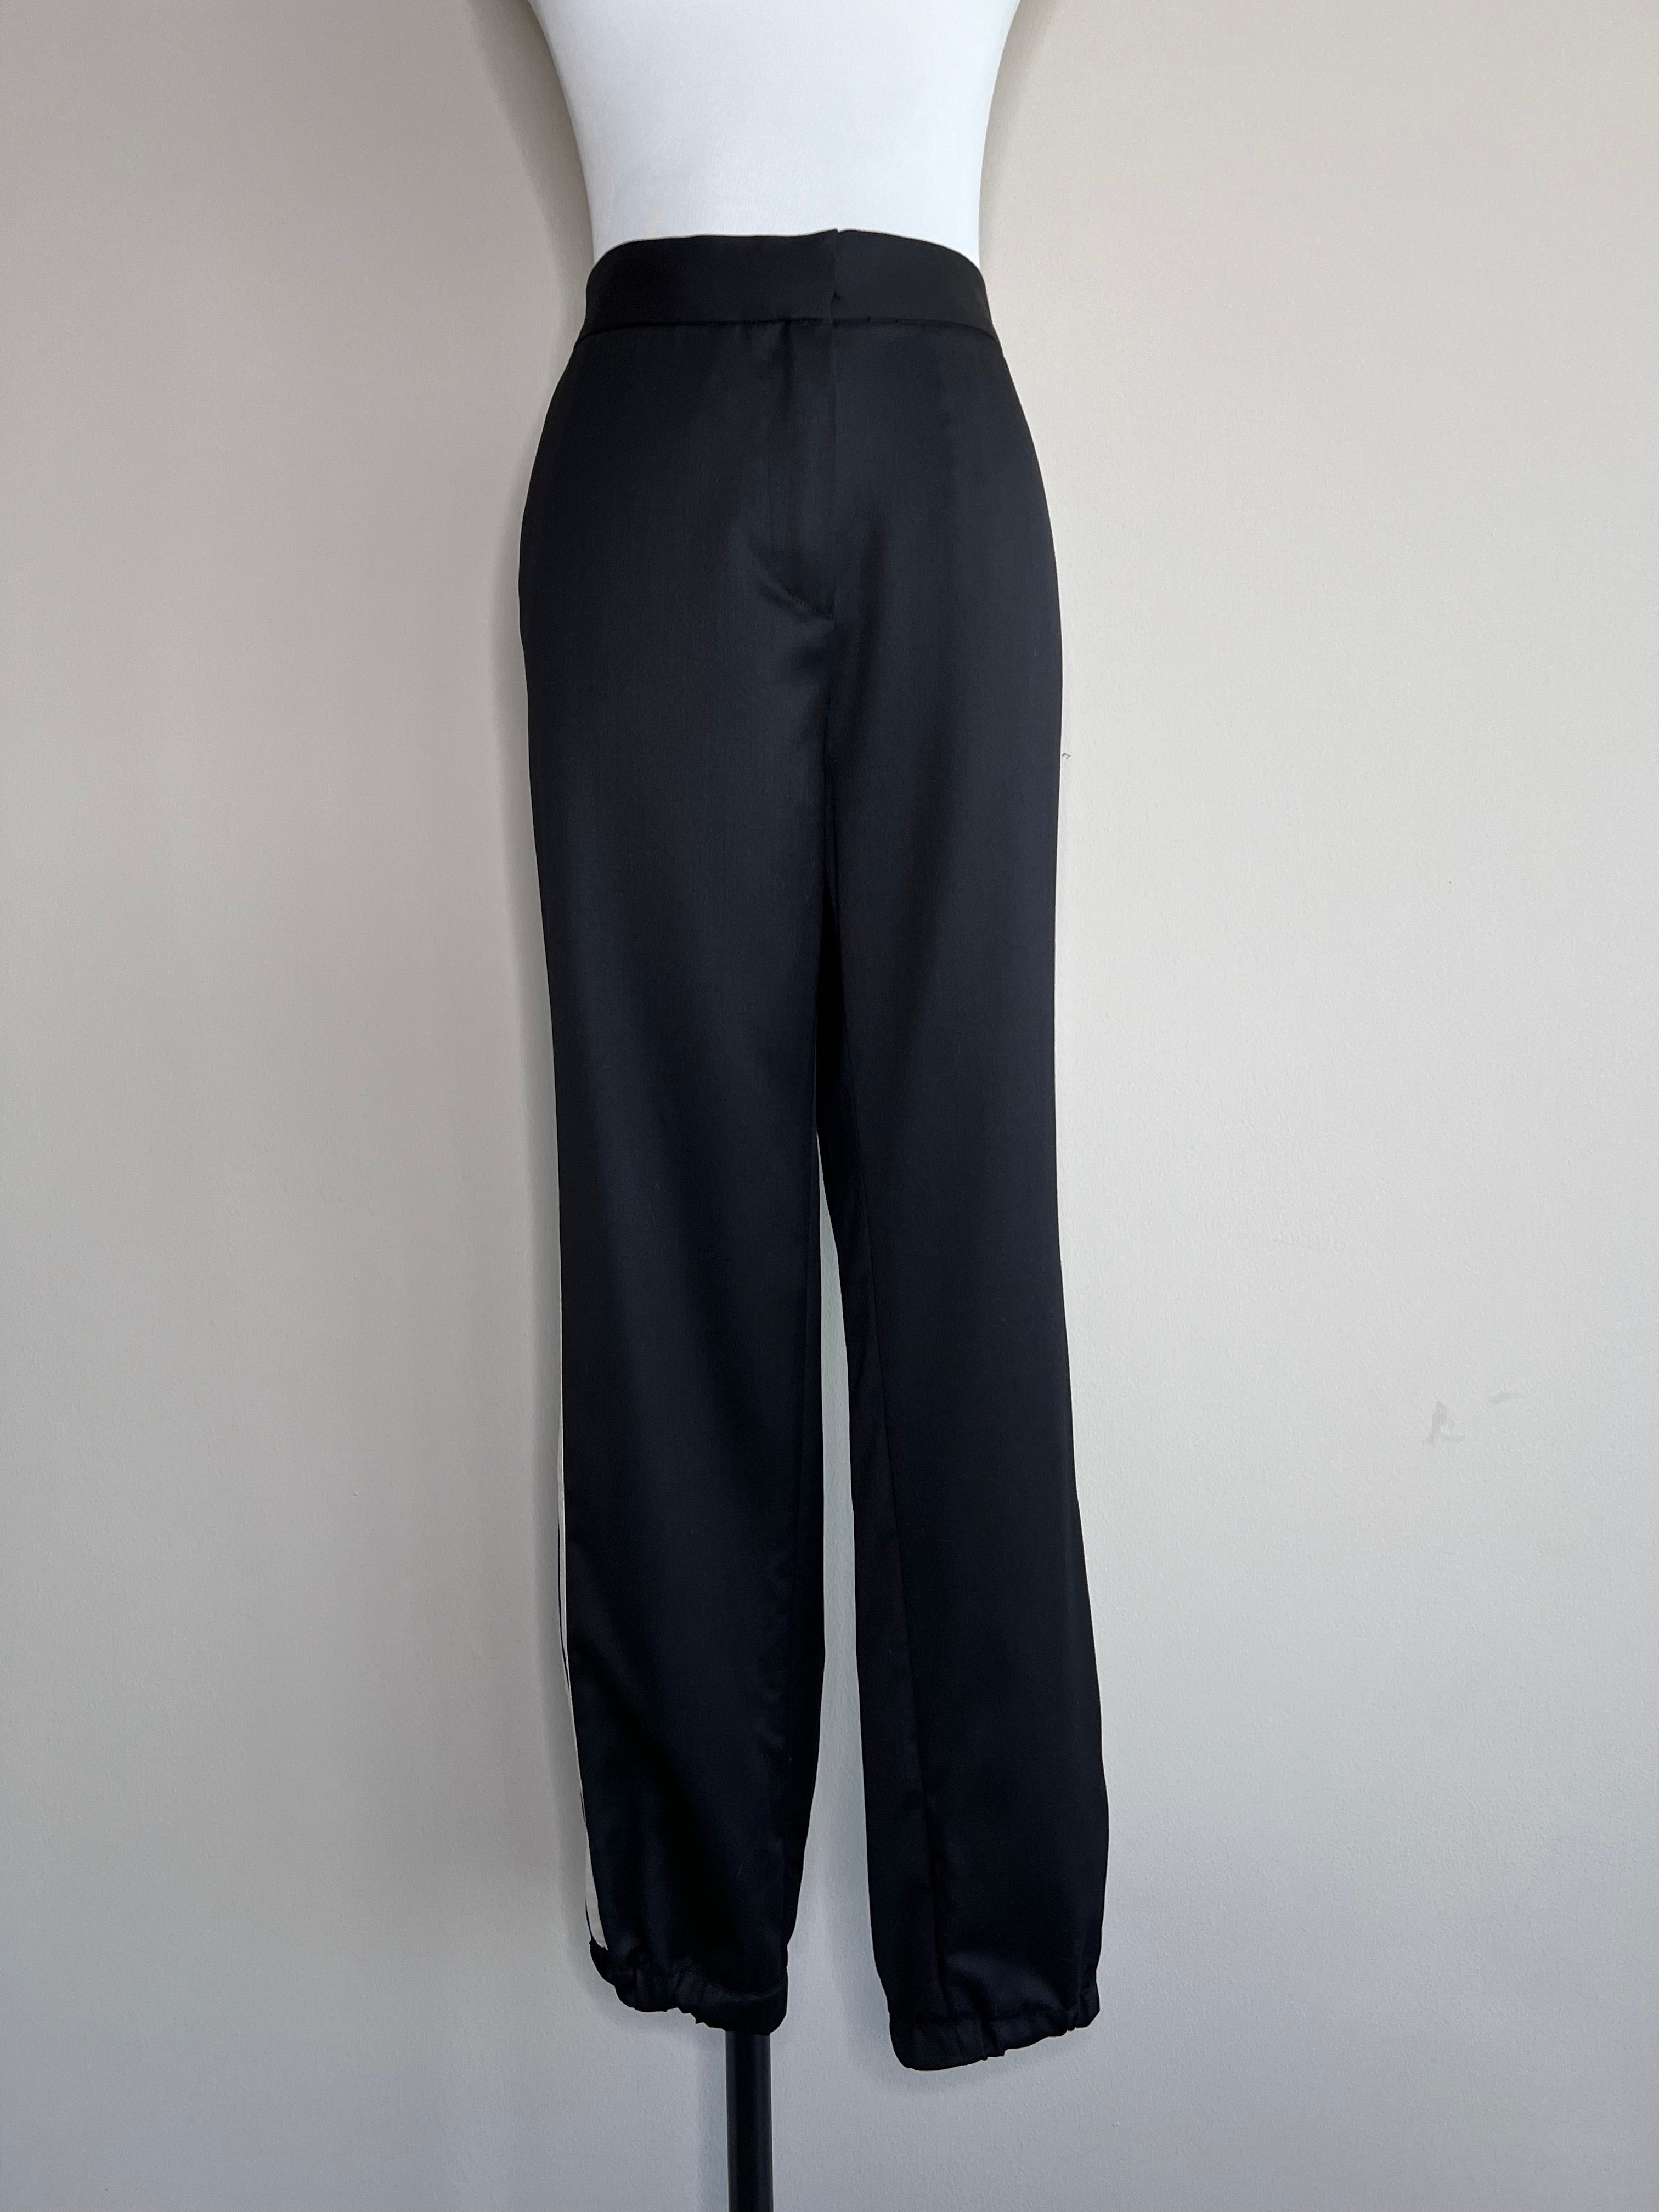 Black satin relaxed fit pants with whote linings on the side - ELIZABETH and JAMES